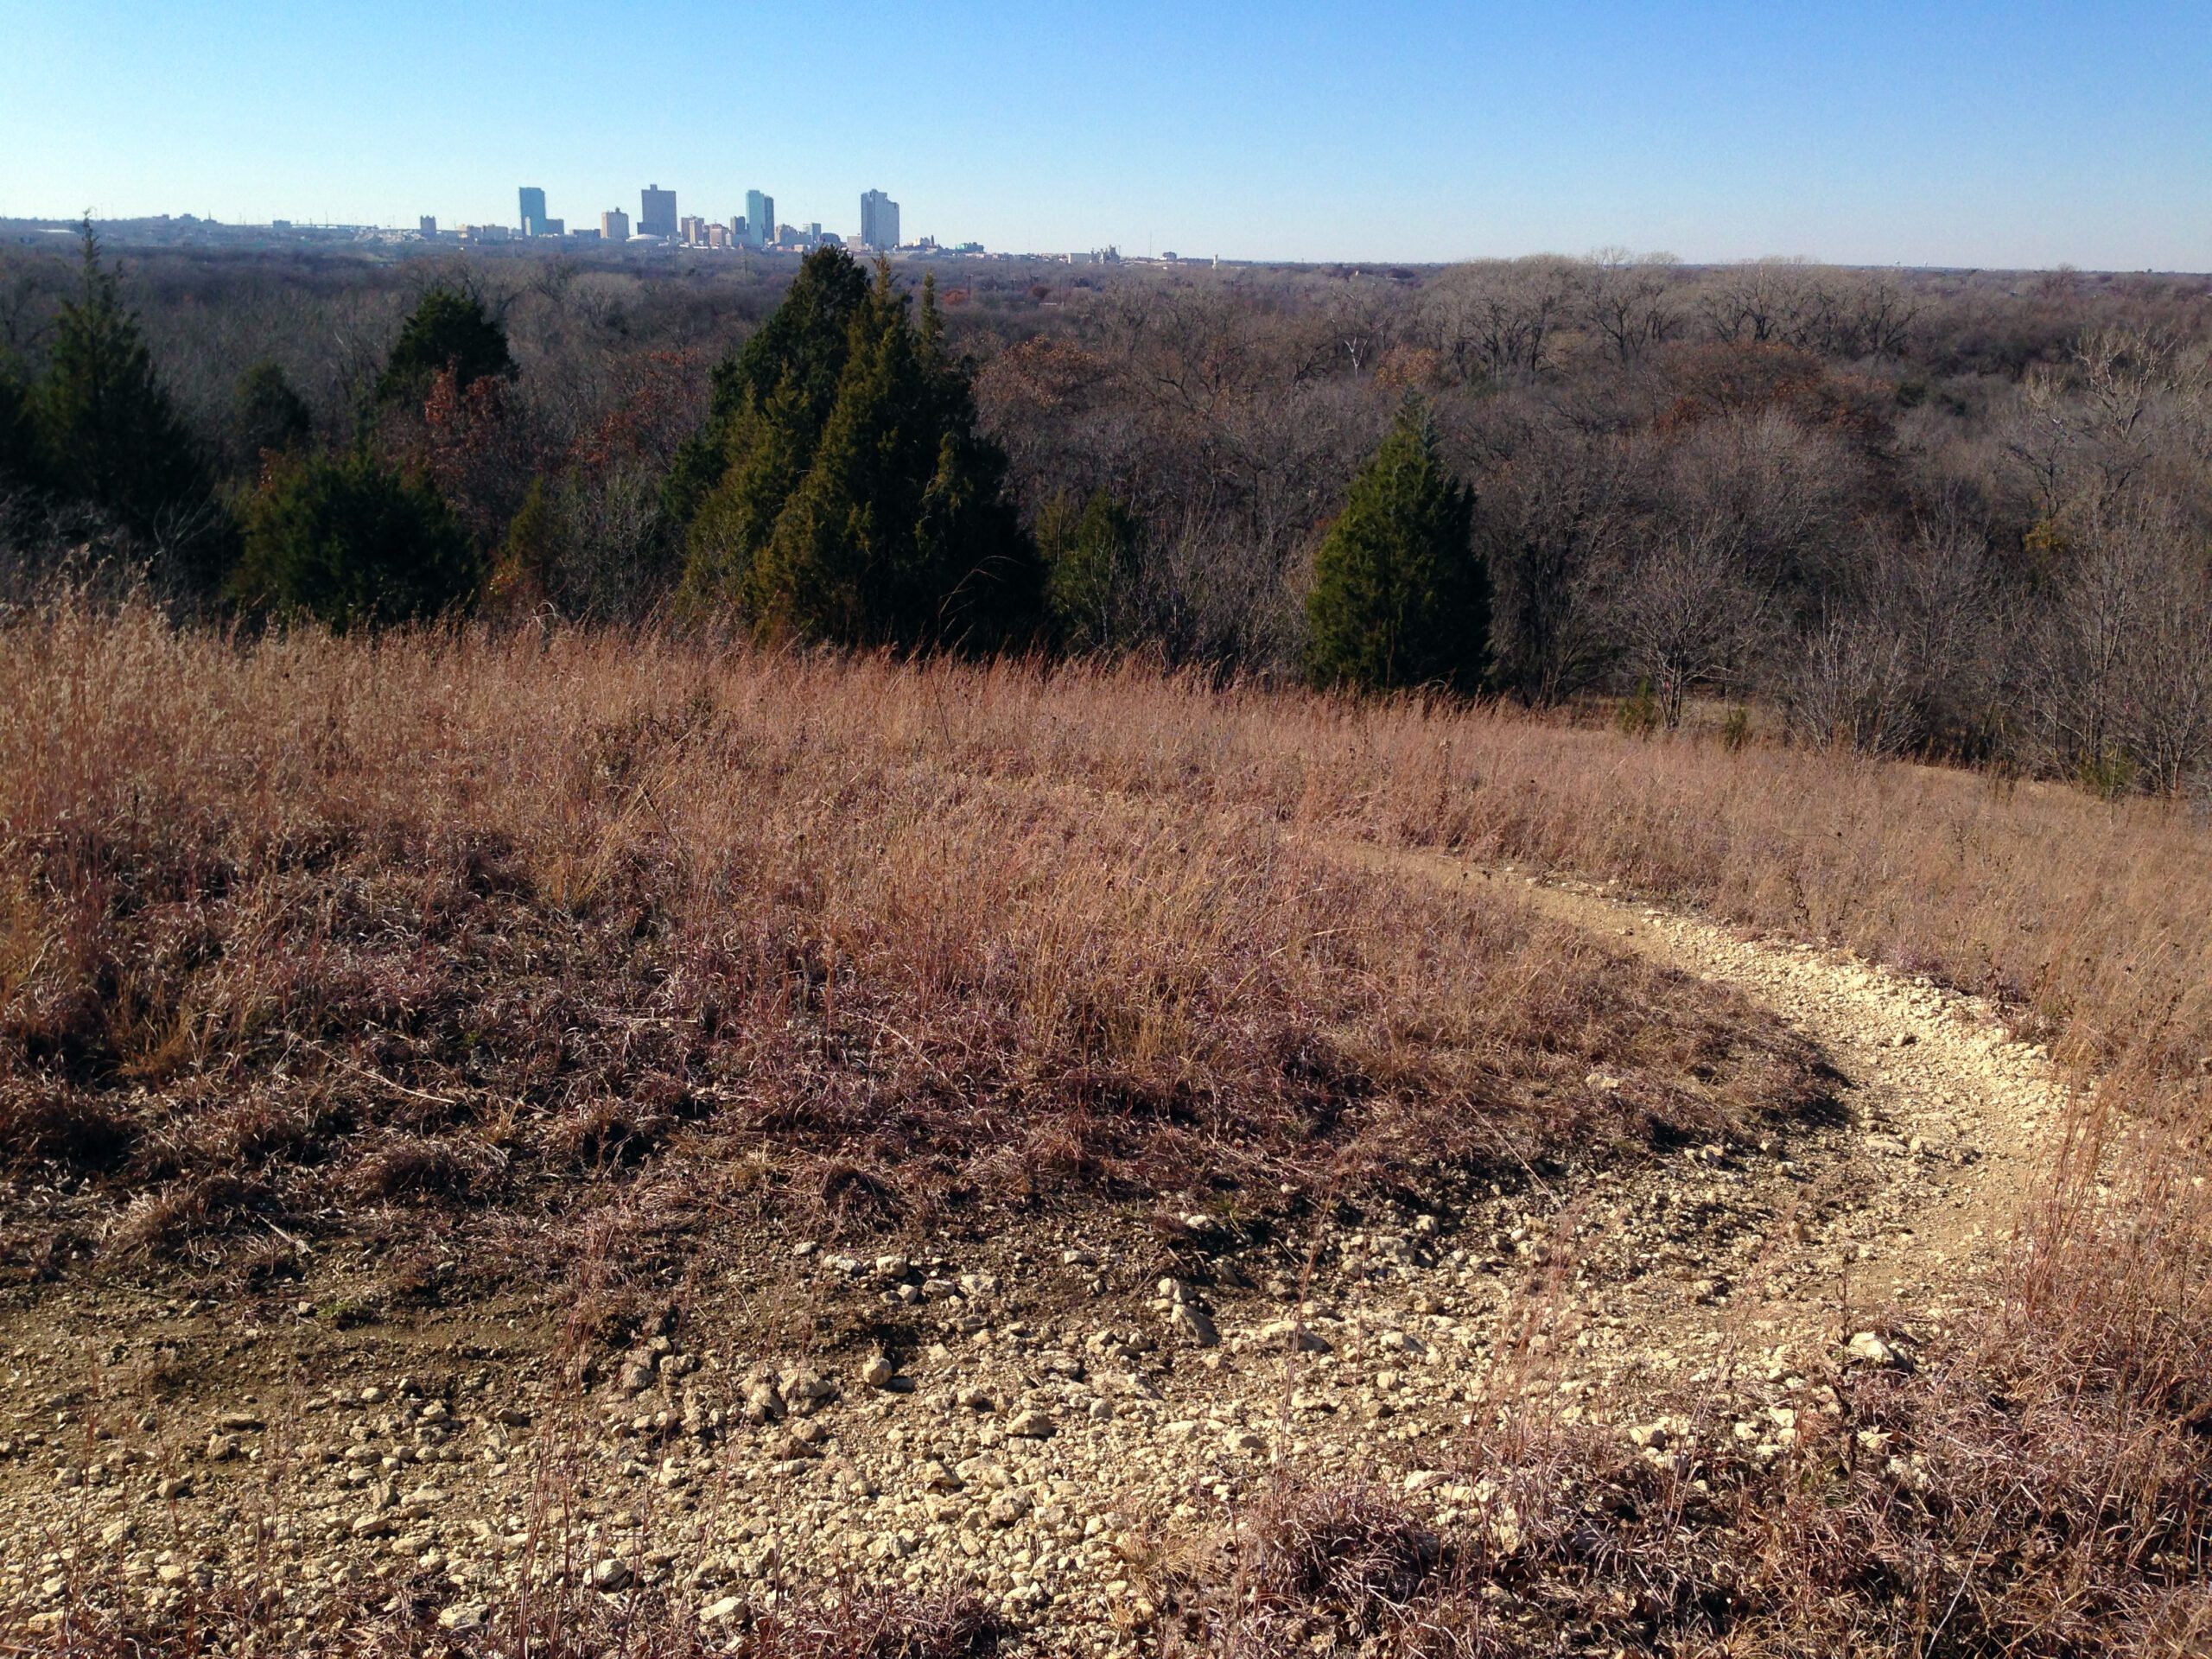 The Overlook Trail in Fort Worth.